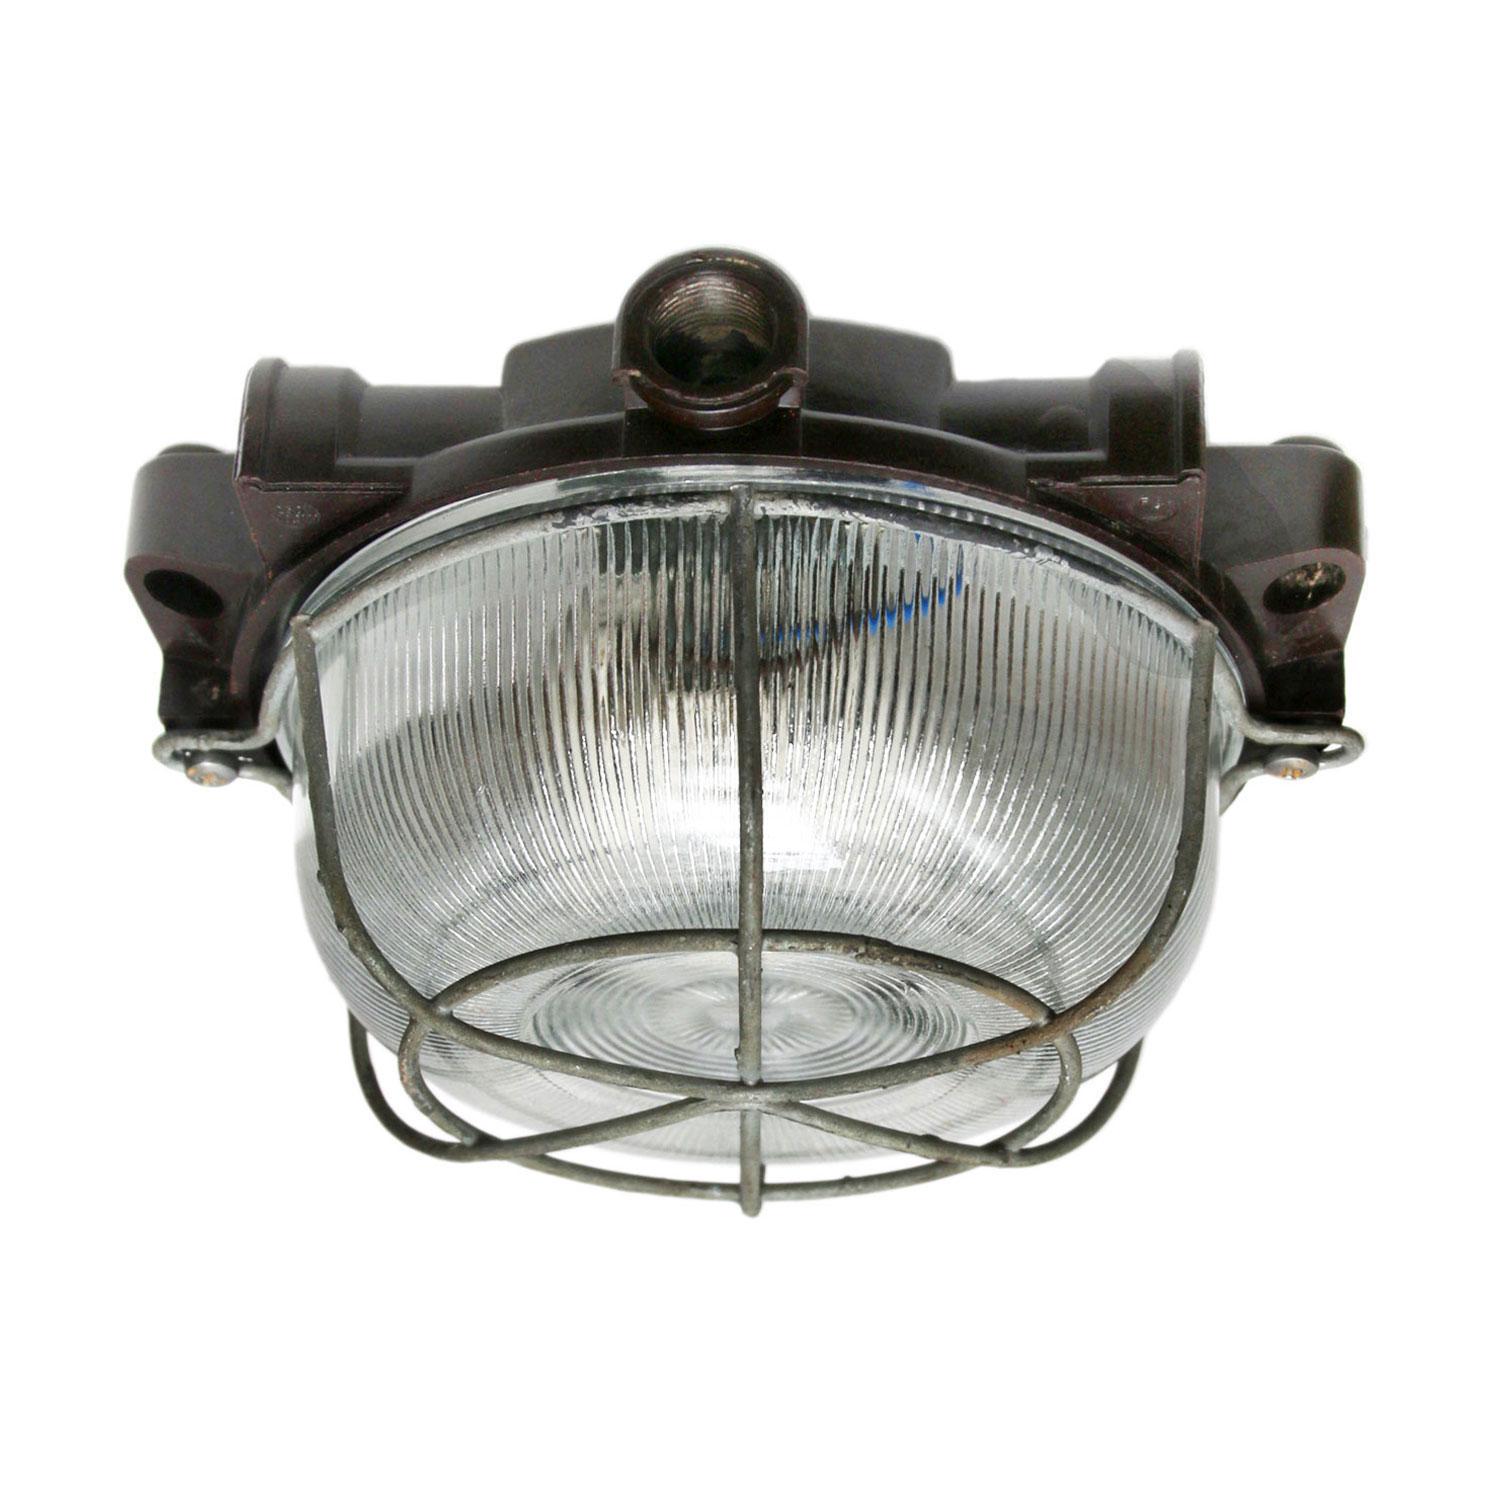 Industrial wall and ceiling scone. Bakelite back. Holophane striped glass.
Metal frame.

Measure: Weight 1.0 kg / 2.2 lb

Priced individual item. All lamps have been made suitable by international standards for incandescent light bulbs,